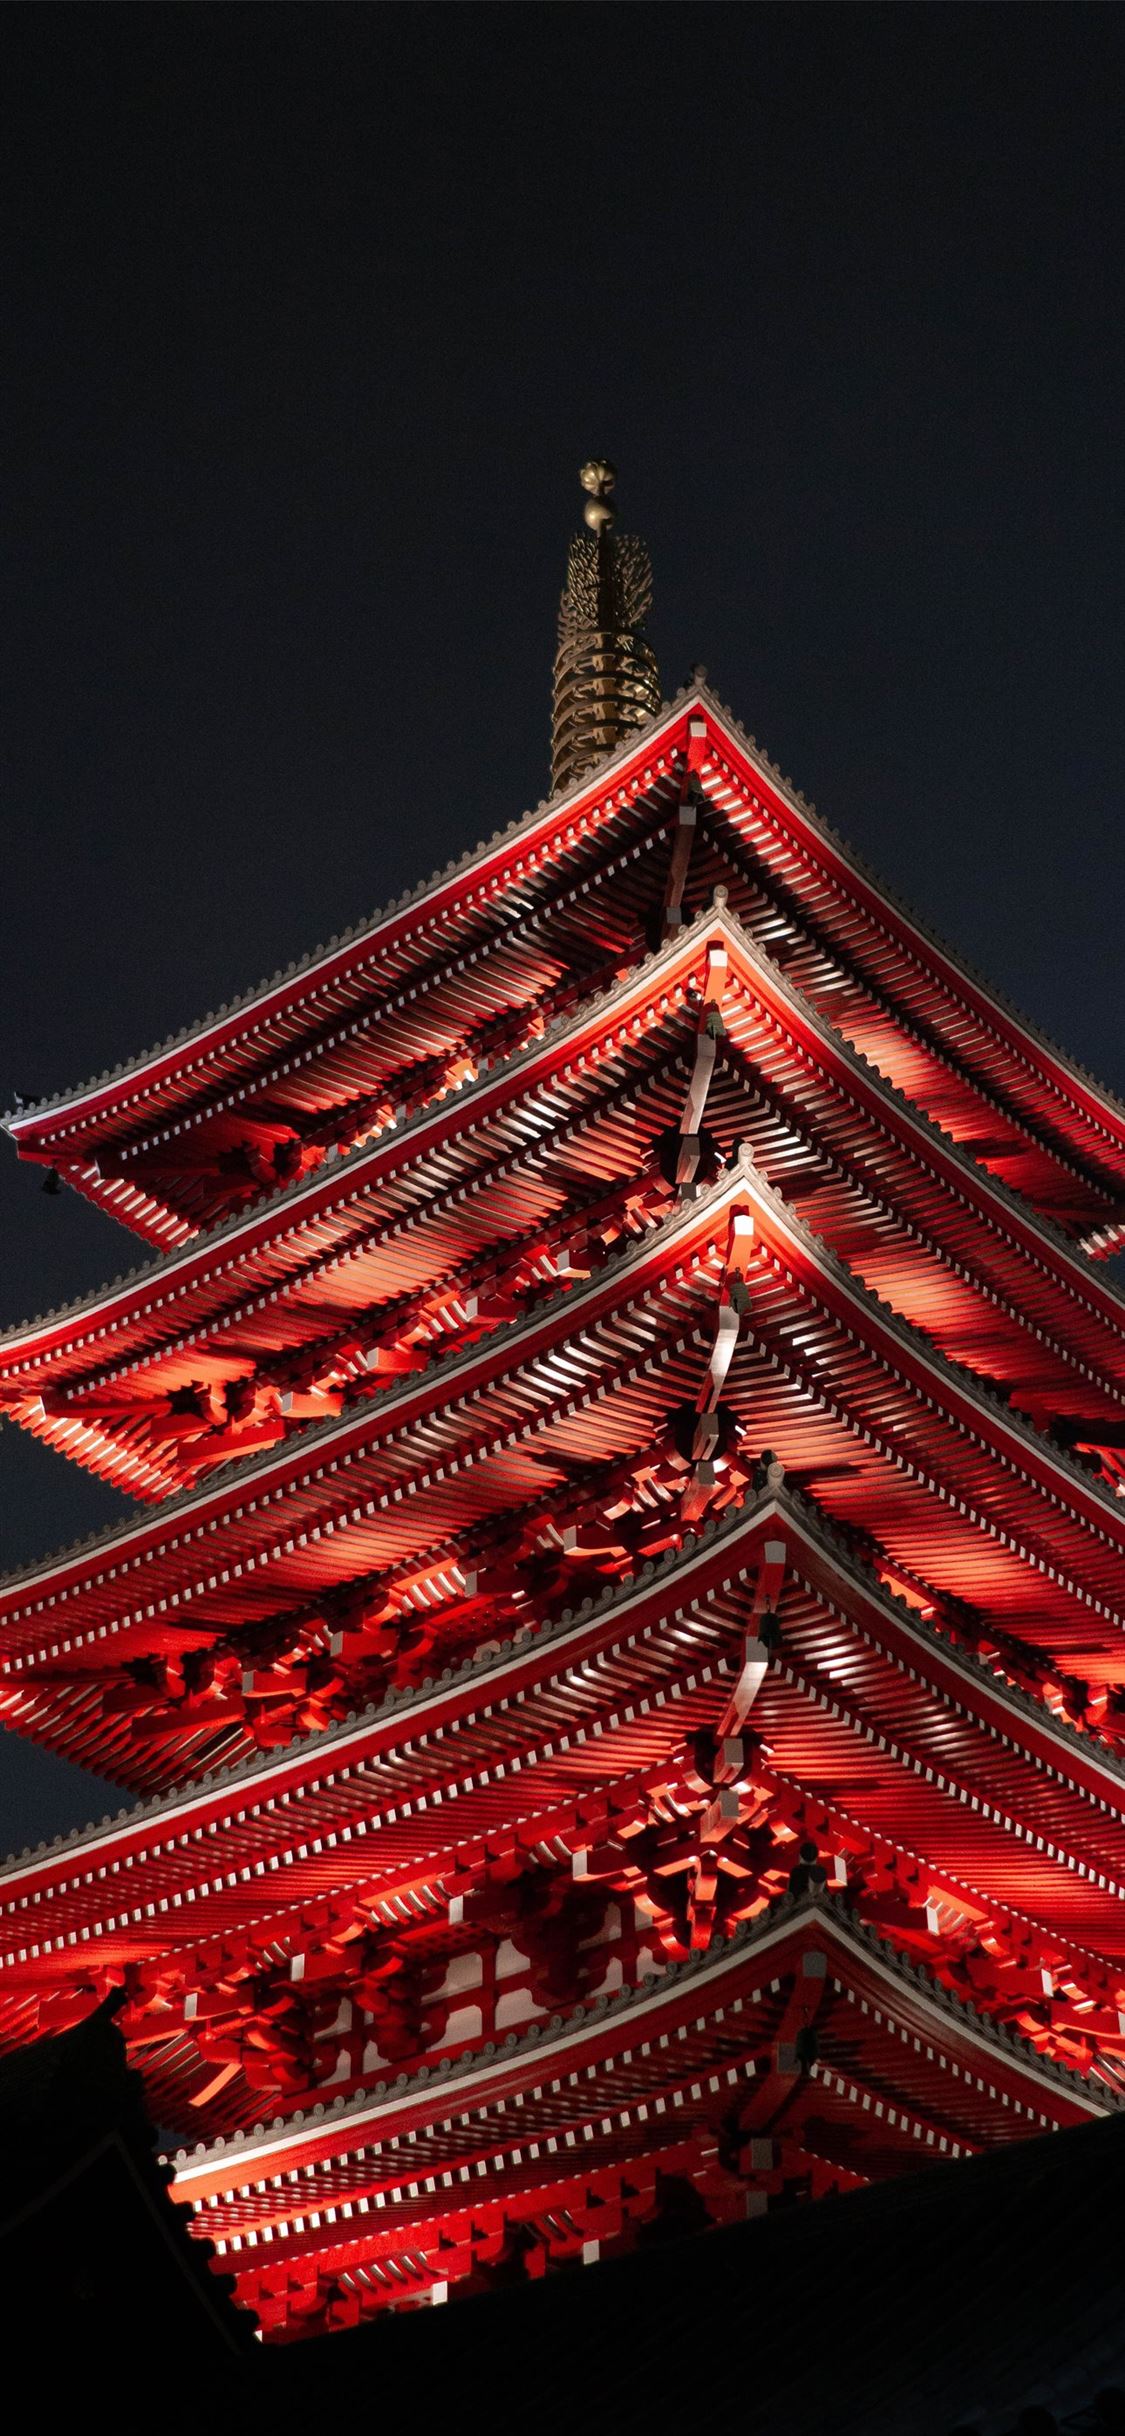 red temple during night iPhone wallpaper 